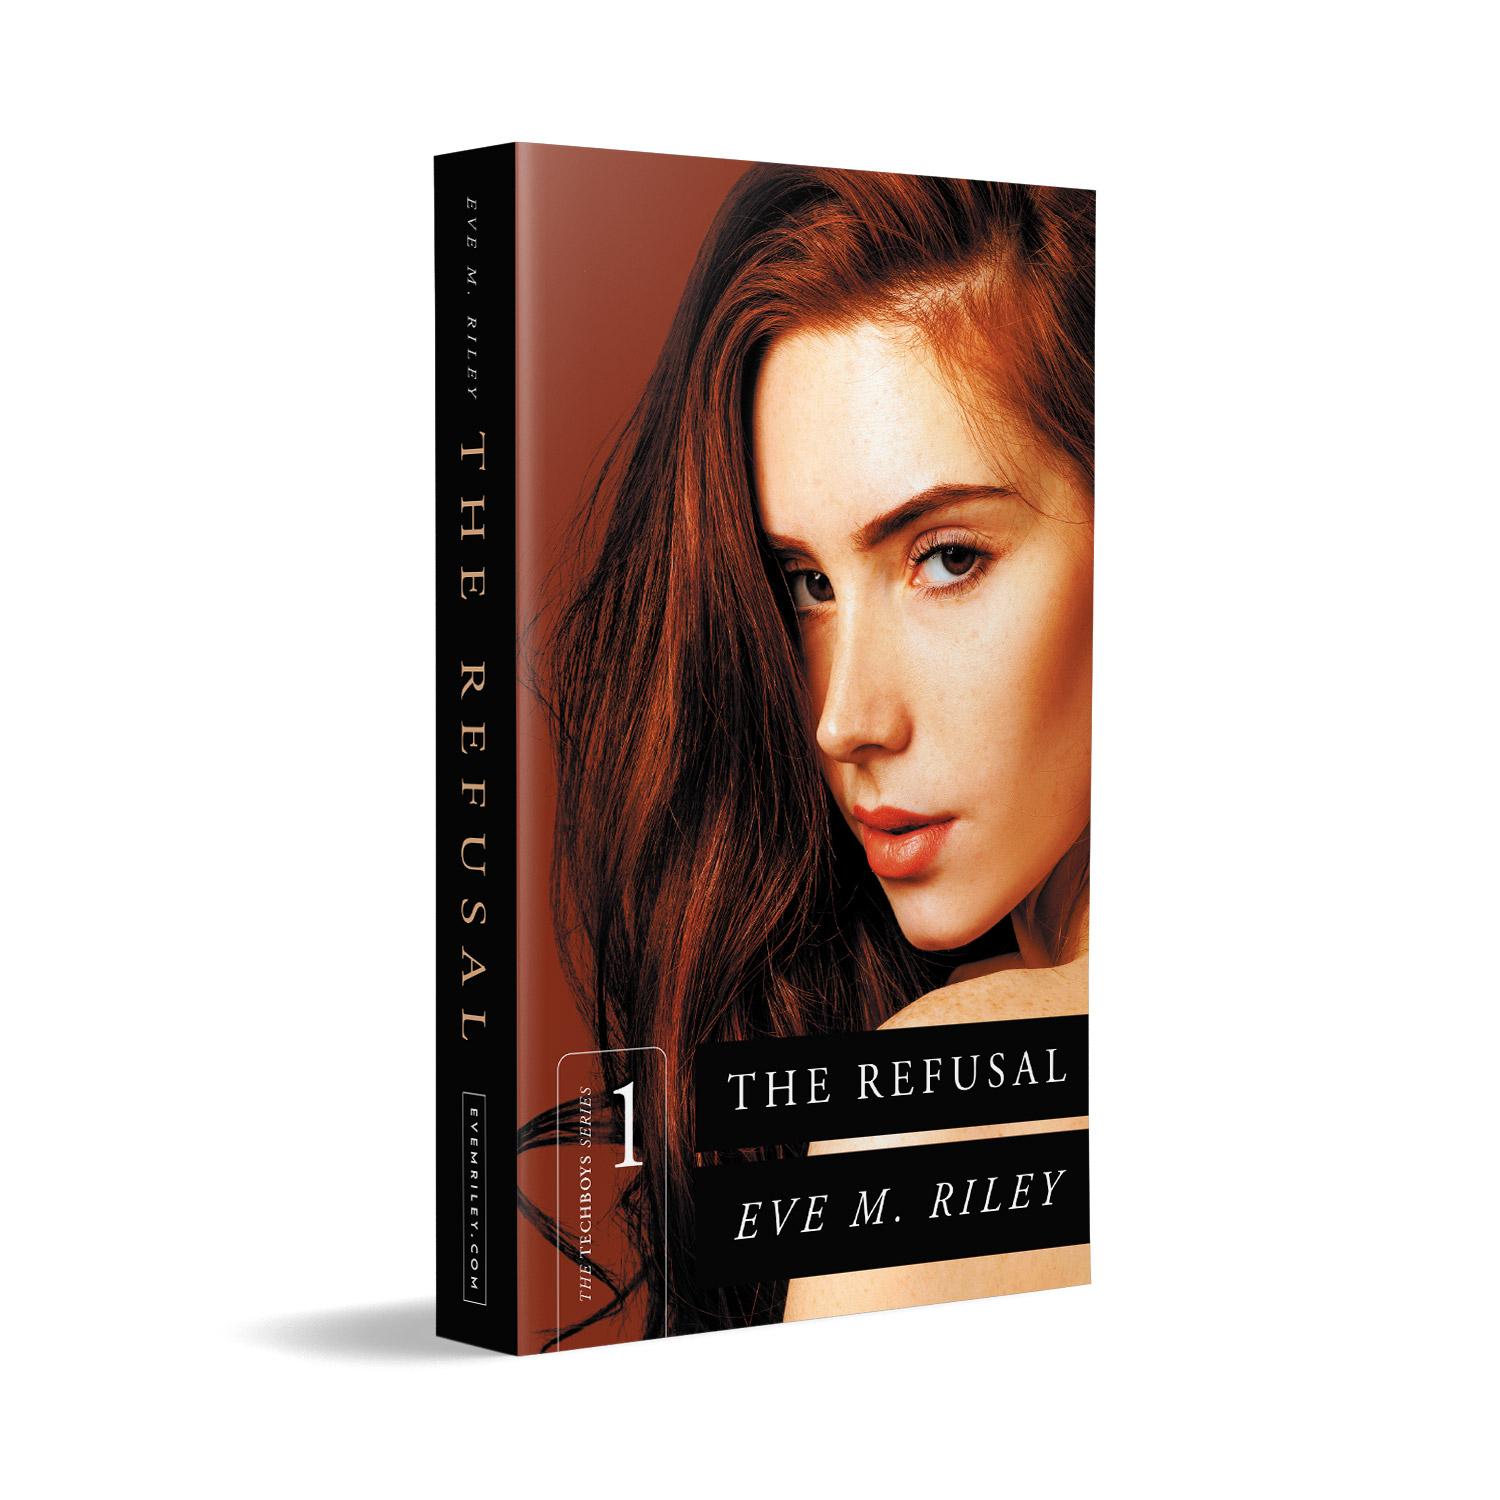 'The Refusal' is the first instalment in an electrifying modern romance series by Eve M. Riley. The book cover design & interior formatting are by Mark Thomas. To learn more about what Mark could do for your book, please visit coverness.com.